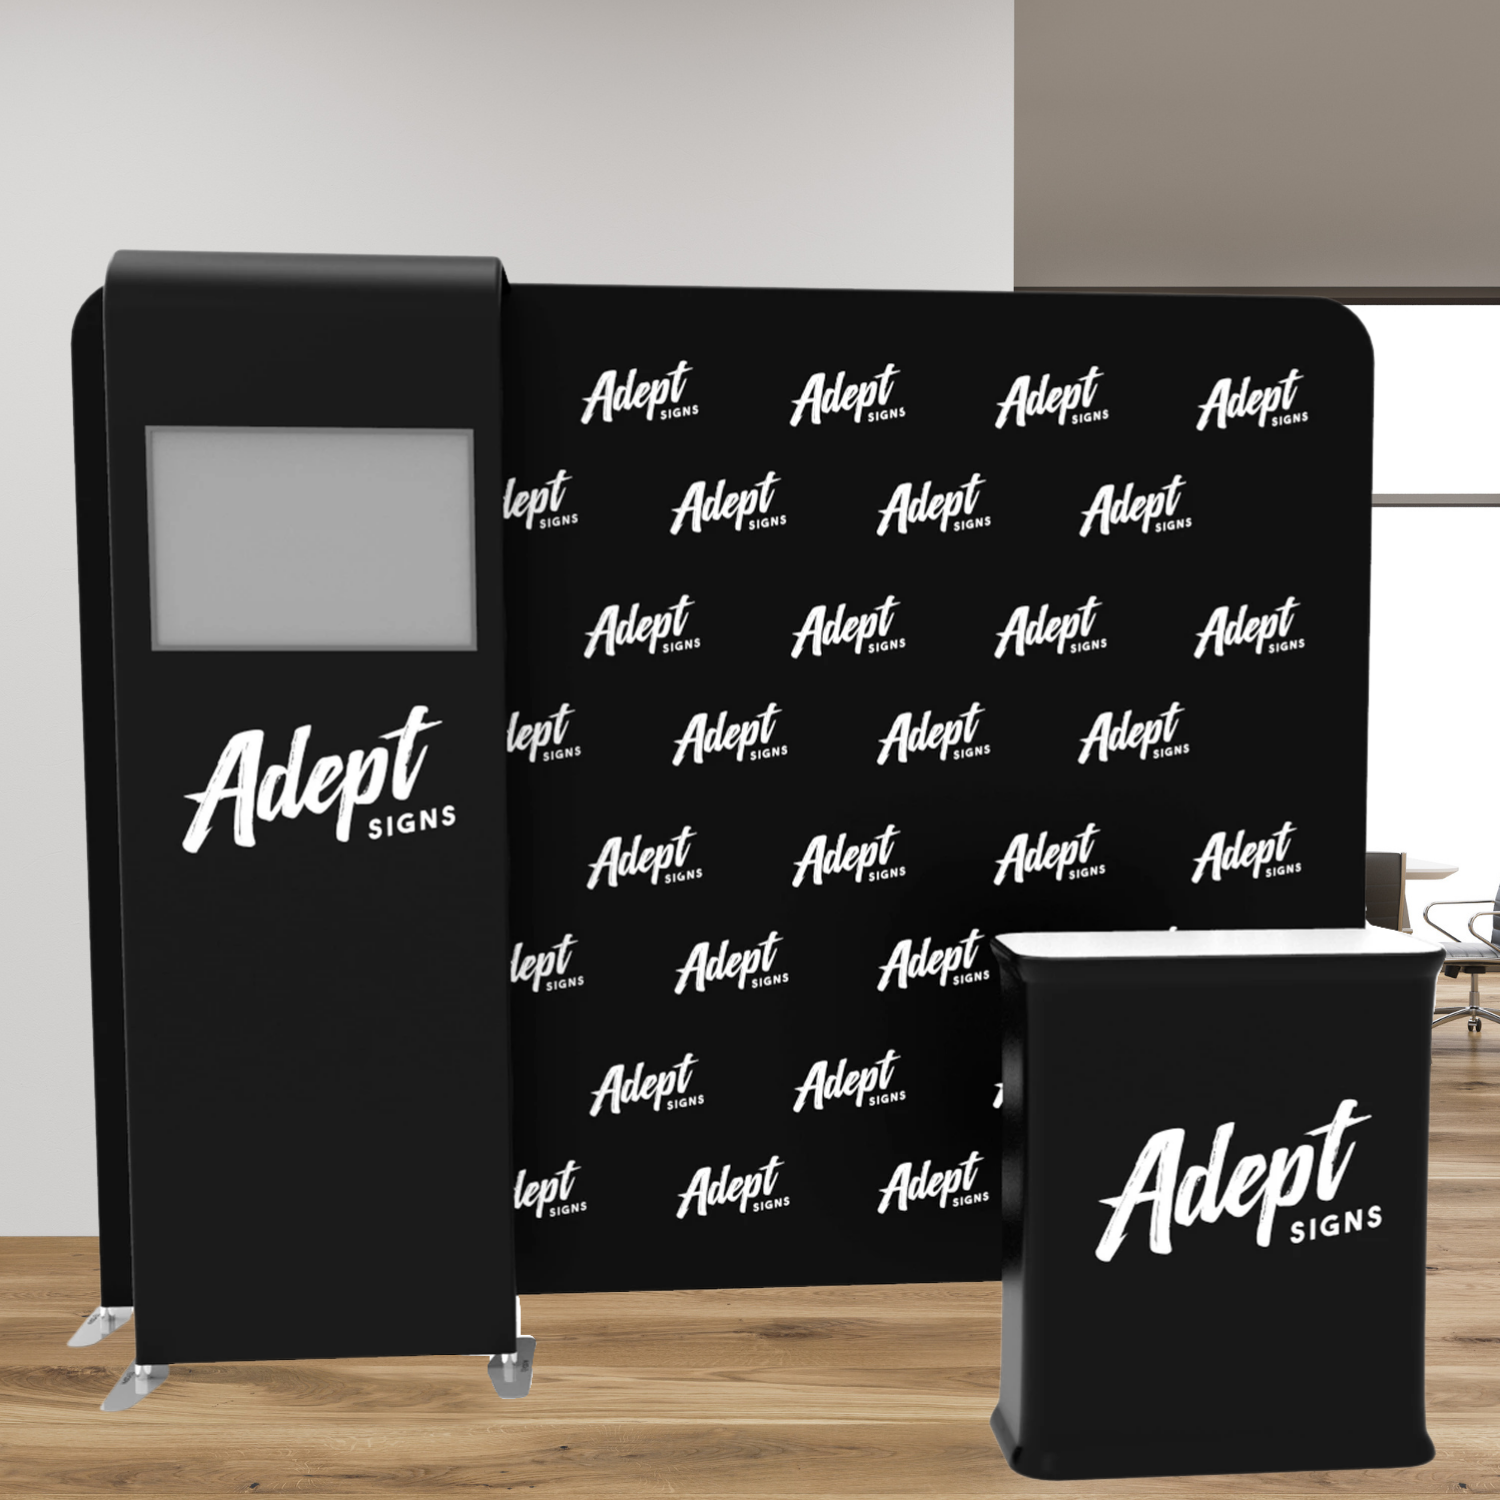 Customize your trade show display with mix-and-match trade show expo sets